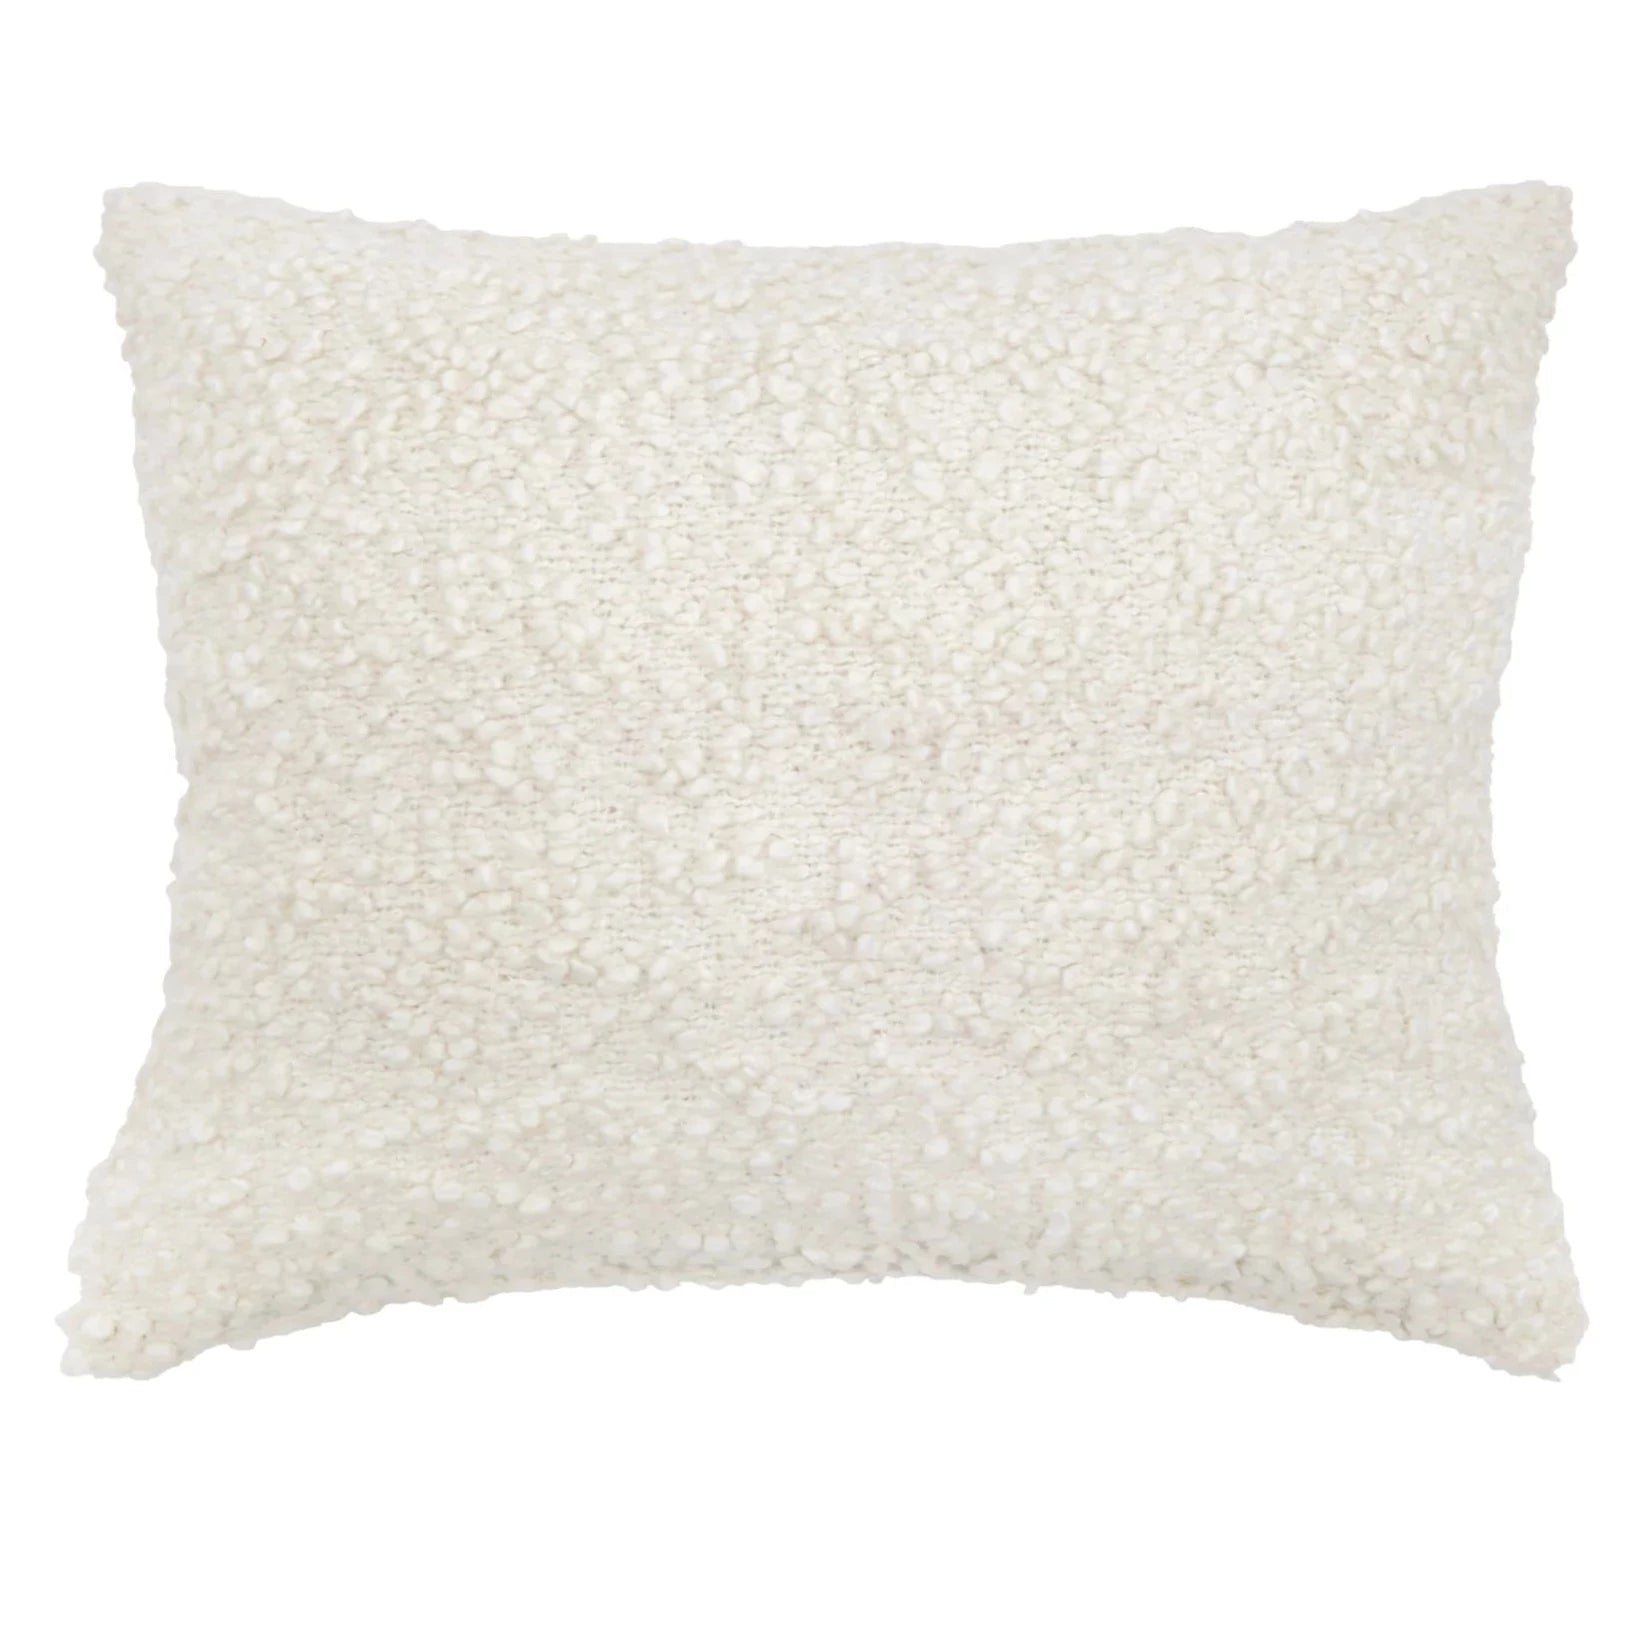 Murphy Ivory Big Pillow by Pom Pom at Home